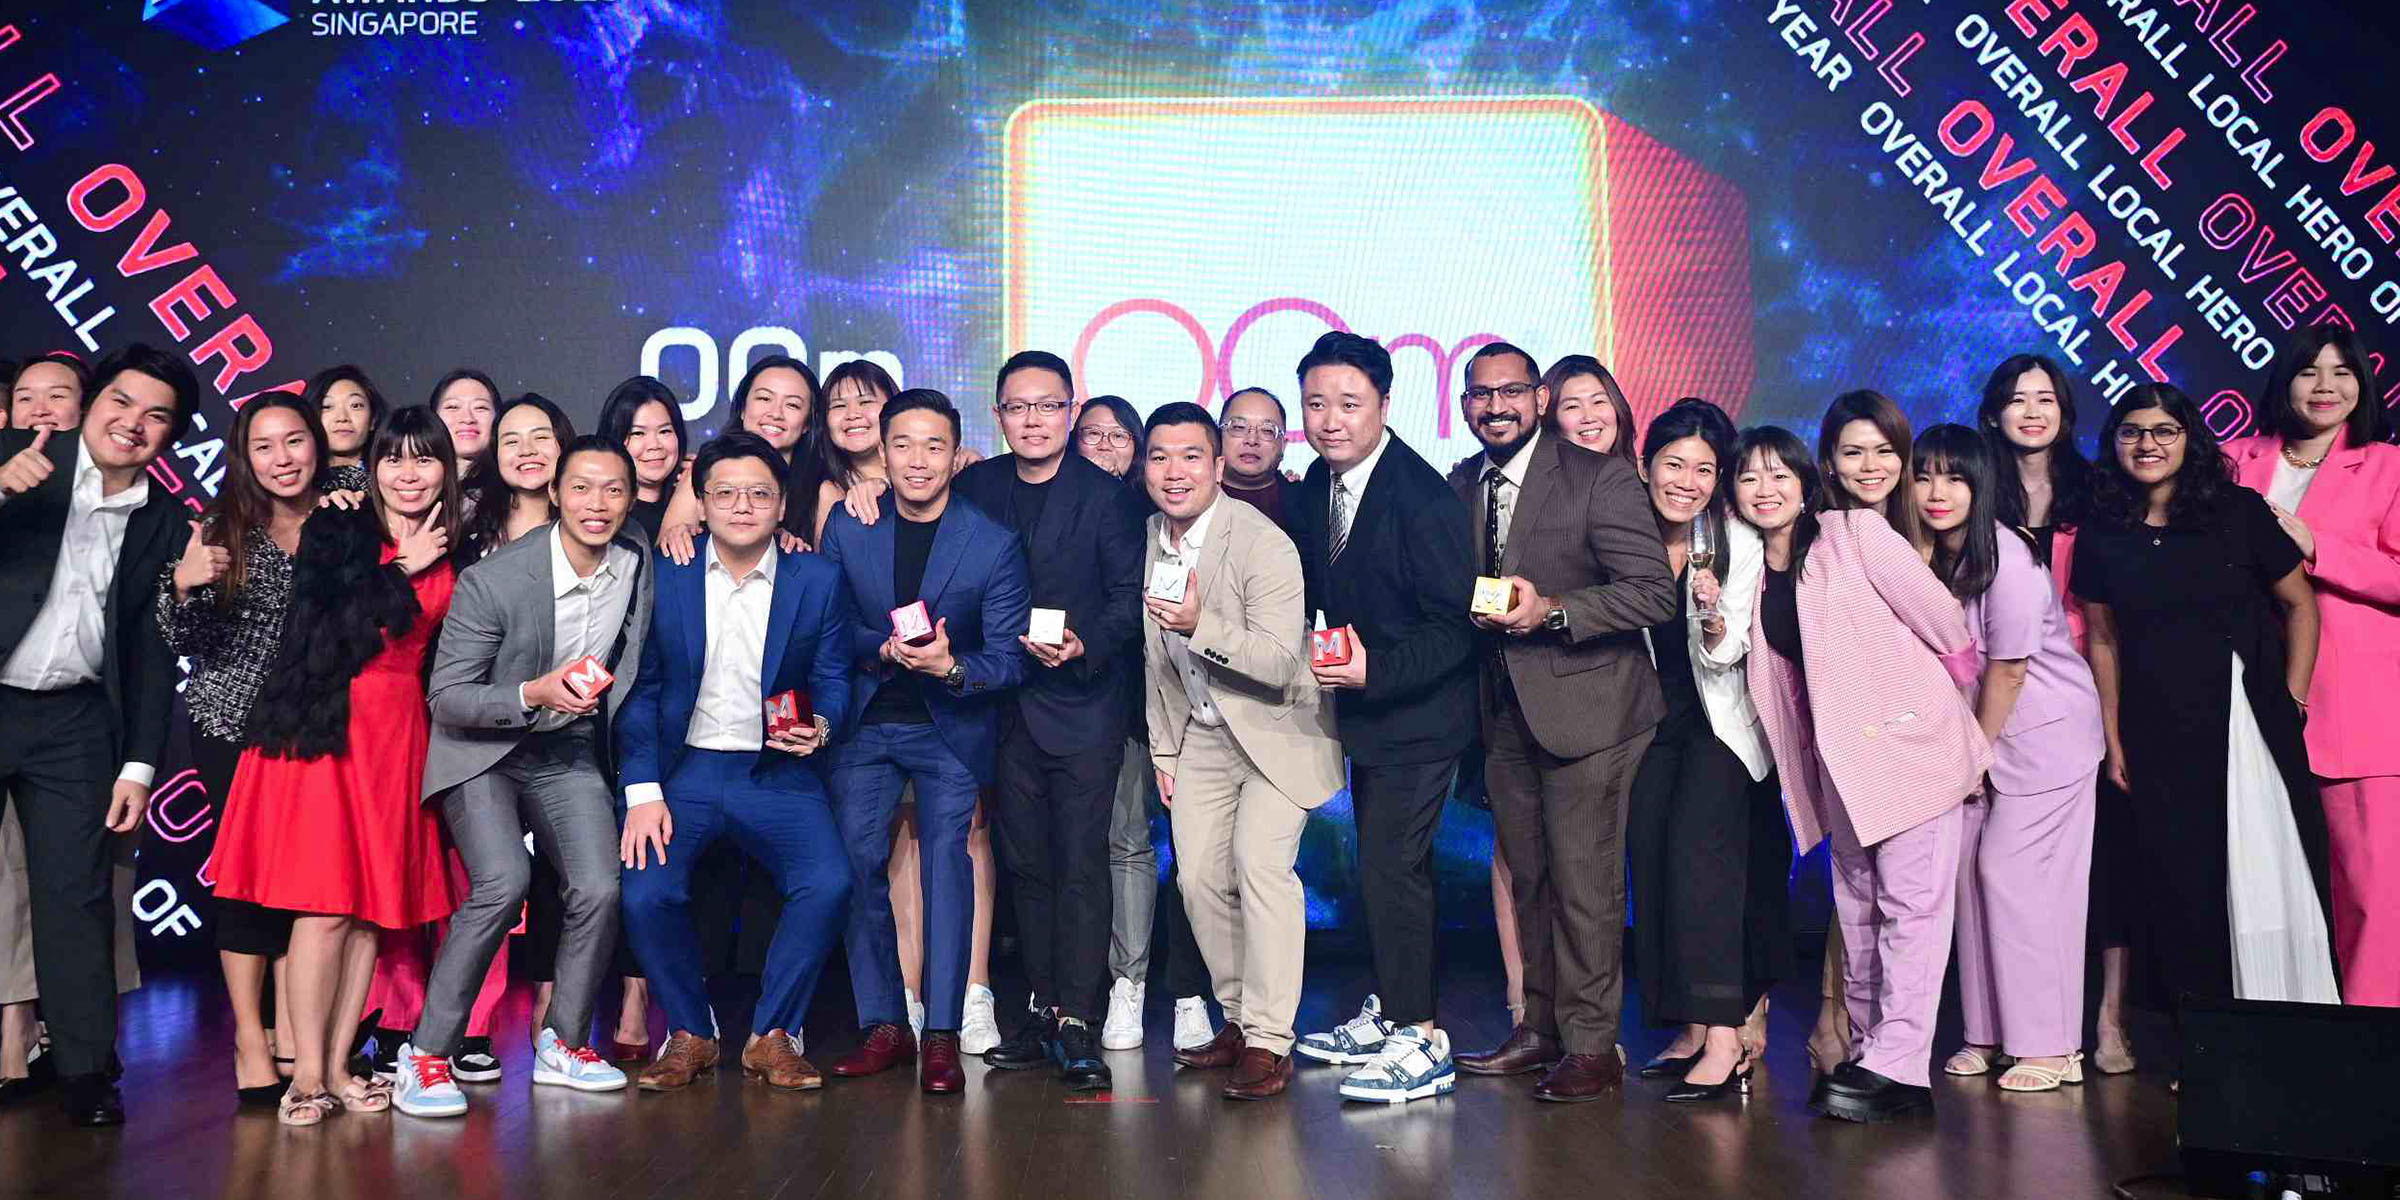 OOm Singapore Shortlisted For 6 Categories From Marketing-Interactive’s Agency Of The Year Awards